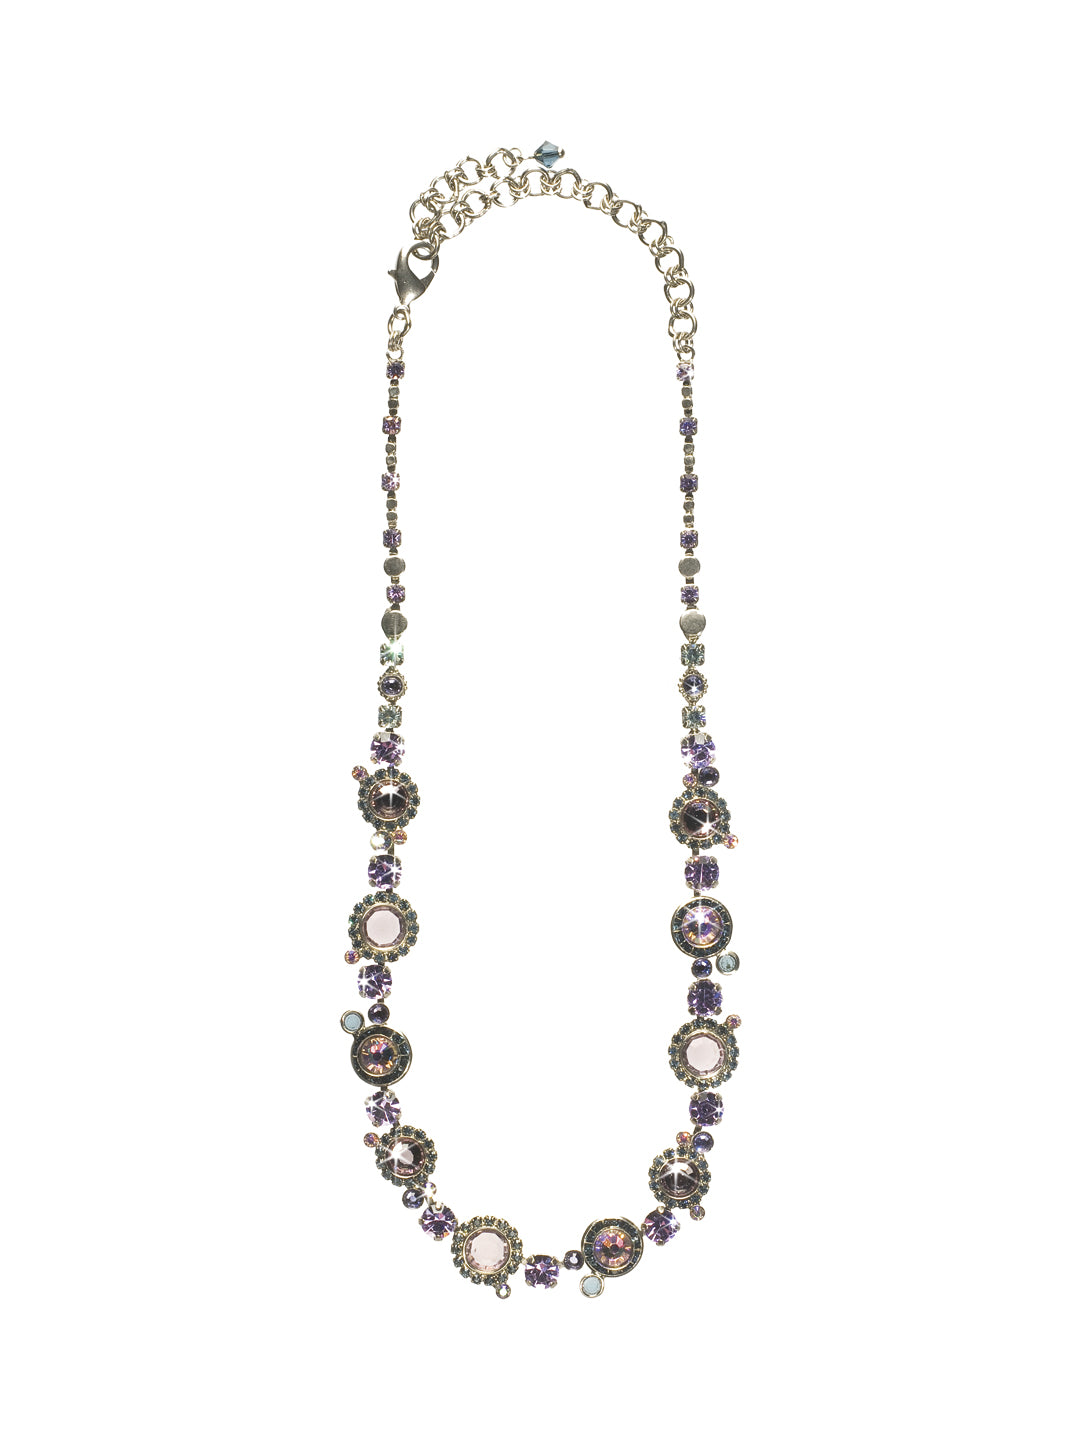 Break Out The Bubbly Line Necklace - NCE12ASHY - classic line necklace From Sorrelli's Hydrangea collection in our Antique Silver-tone finish.